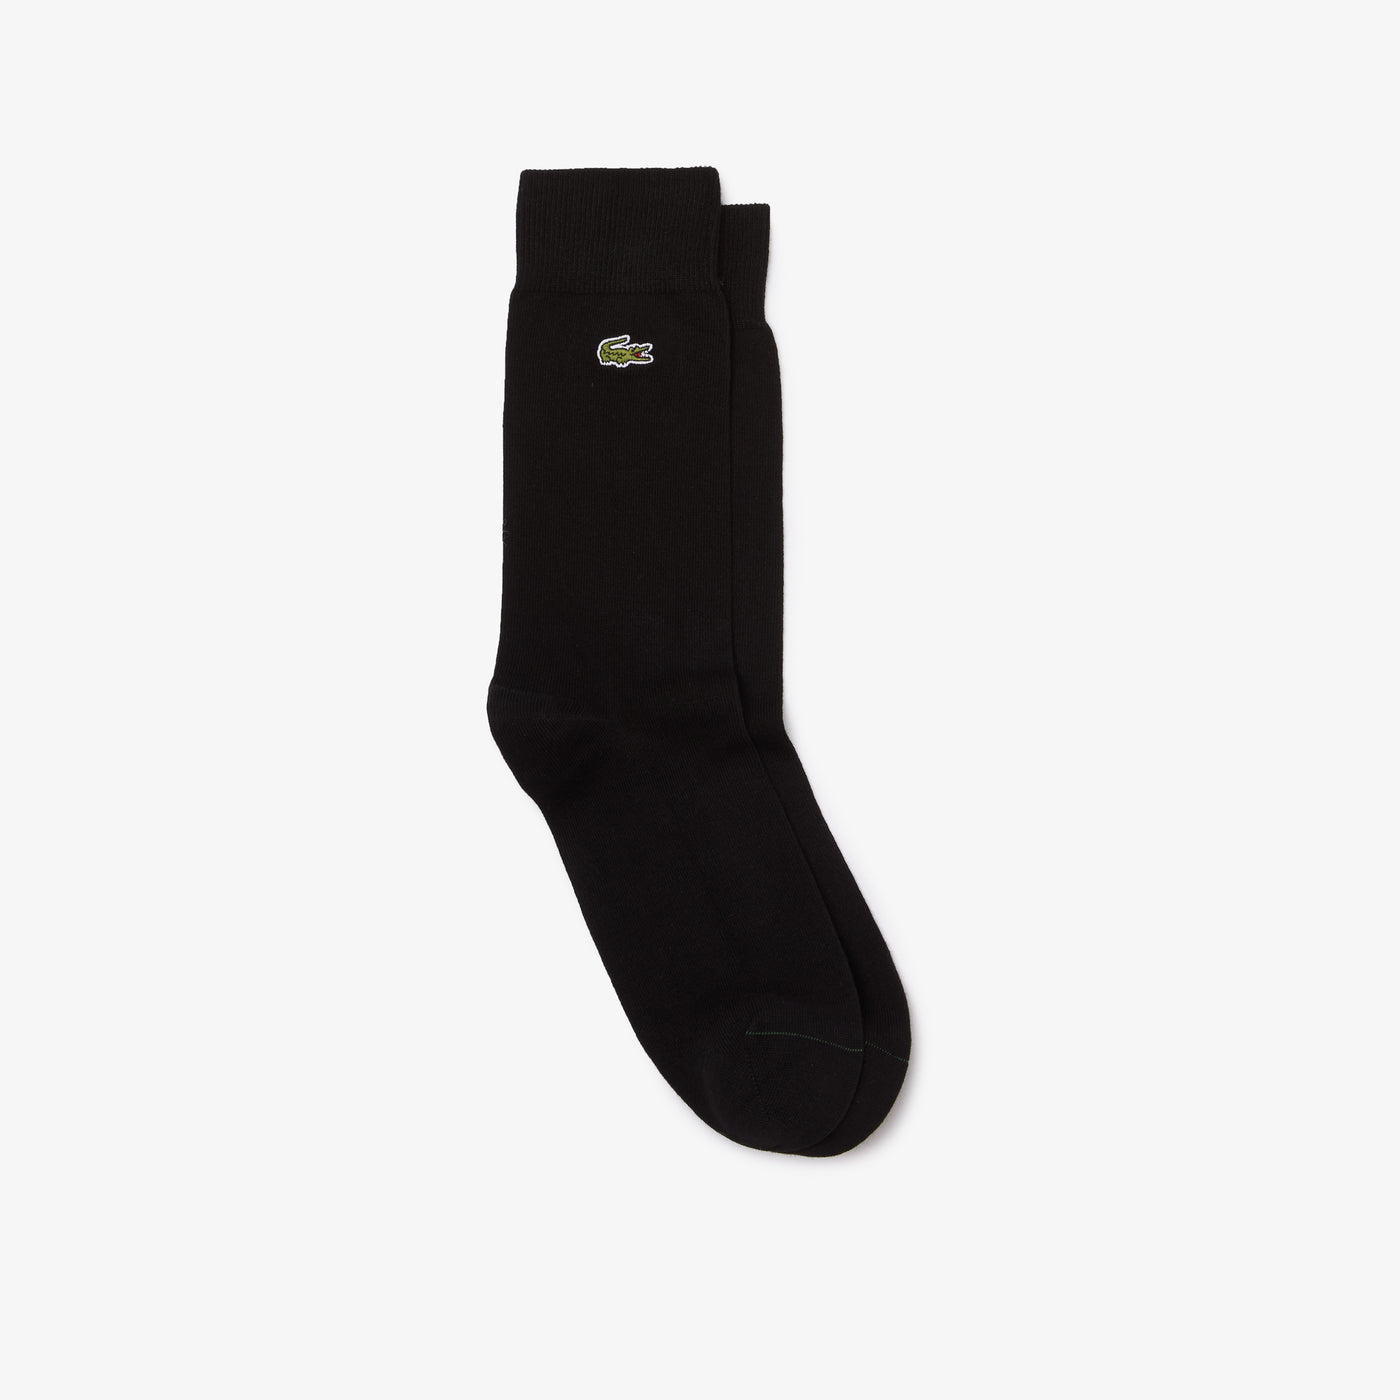 Shop The Latest Collection Of Lacoste Unisex Cotton Blend High-Cut Socks - Ra4264 In Lebanon